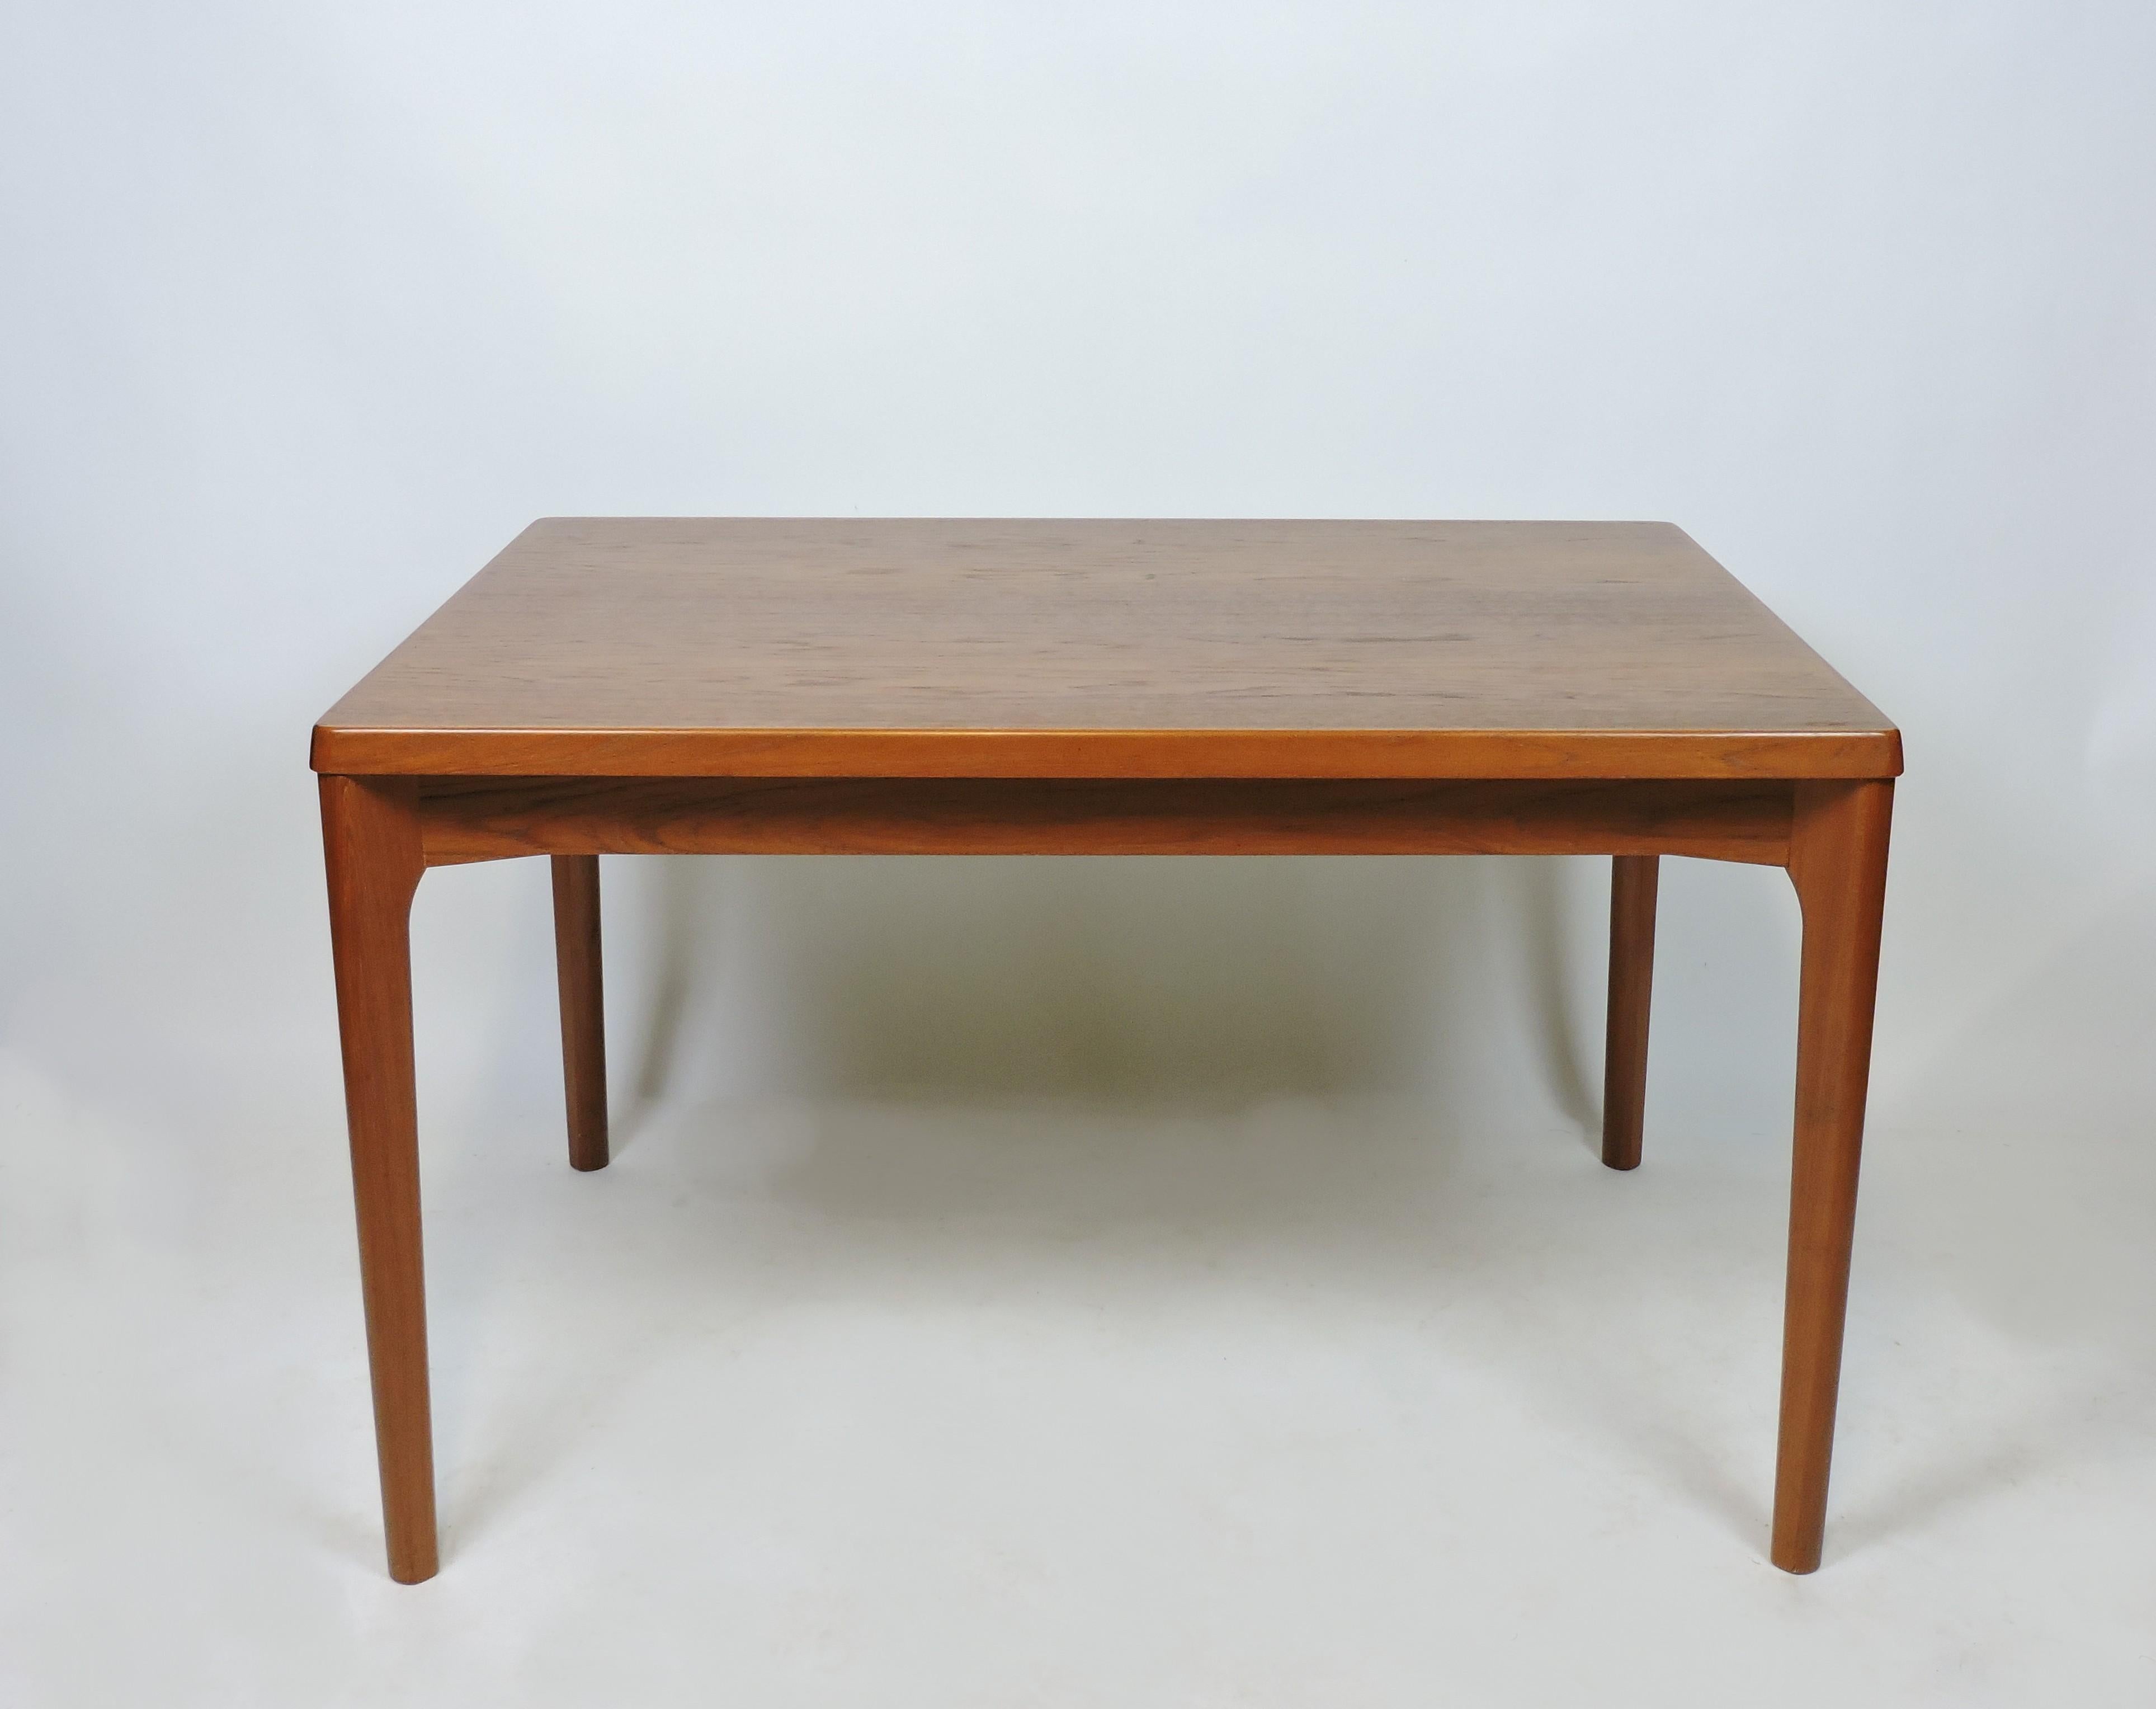 Simple and elegant dining table designed by Henning Kjaernulf and manufactured in Denmark by Vejle Stole. This table has beautiful wood grain, sculpted solid teak legs, and two hidden leaves that can extend the table from 47 inches to 82 1/2 inches.